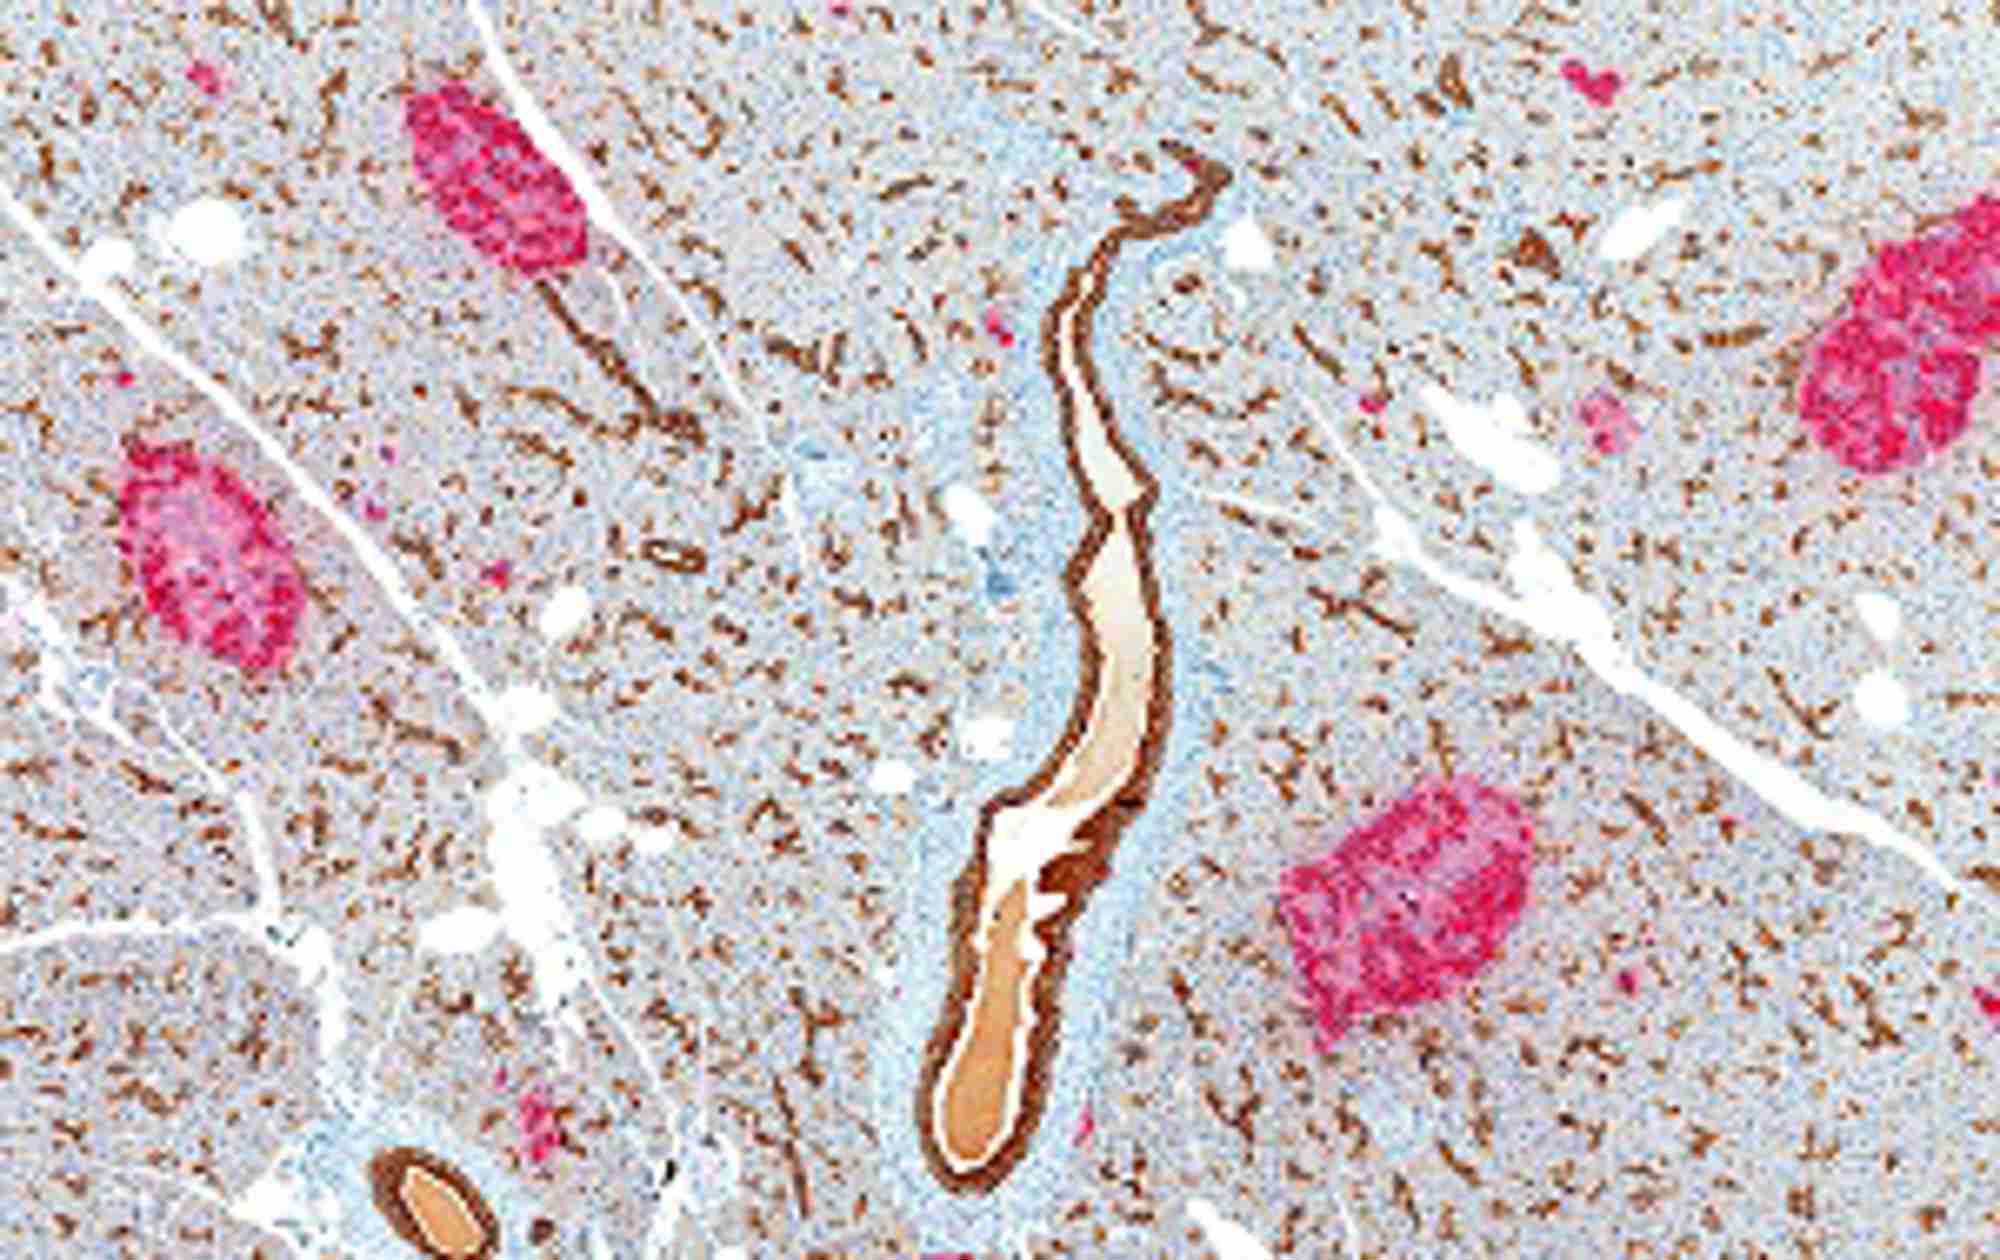 Pancreas showing multiple islets of Langerhans containing b-cells stained immunohistochemically for insulin (red) with ducts stained for cytokeratin (brown). Credit: Shutterstock